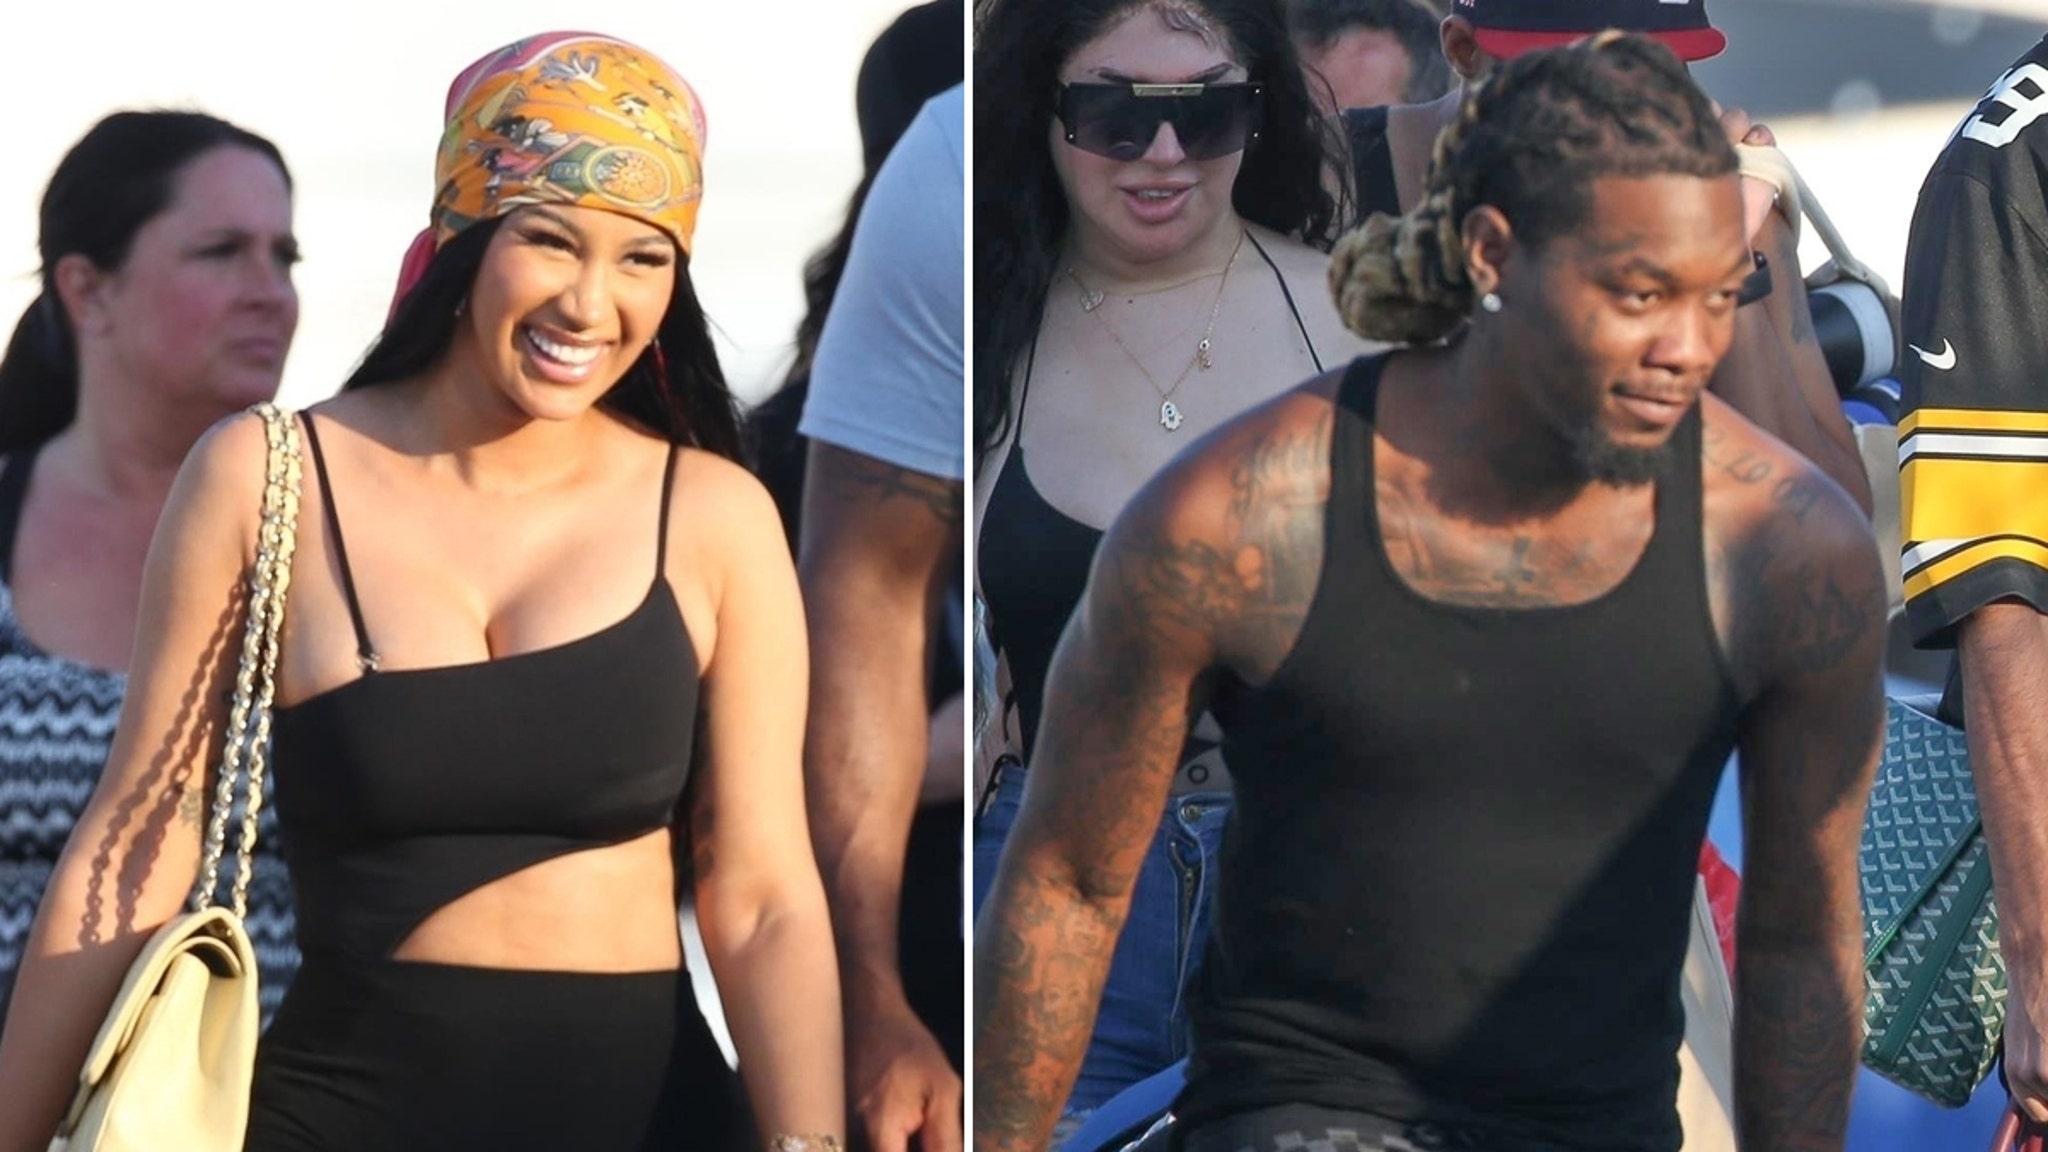 Cardi B & Offset Hit the Streets of Mexico, Buy Bracelets from Local Kids